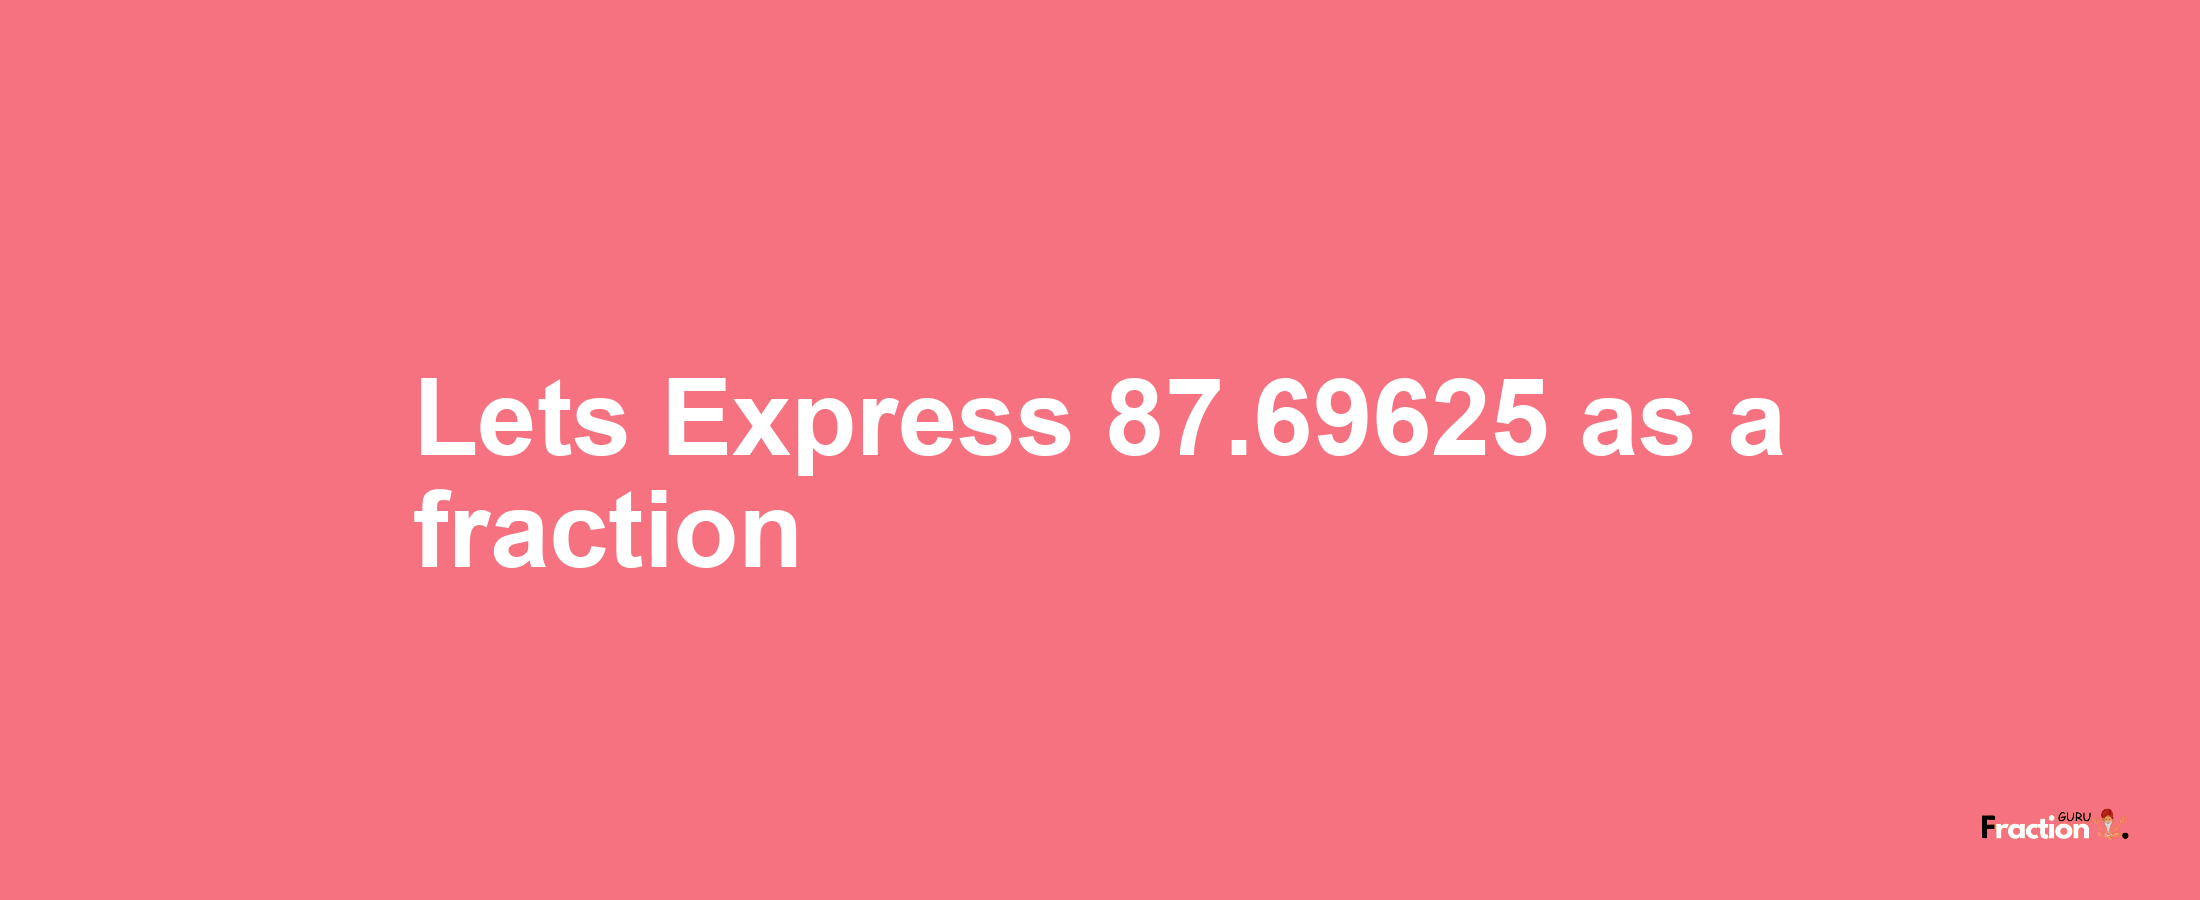 Lets Express 87.69625 as afraction